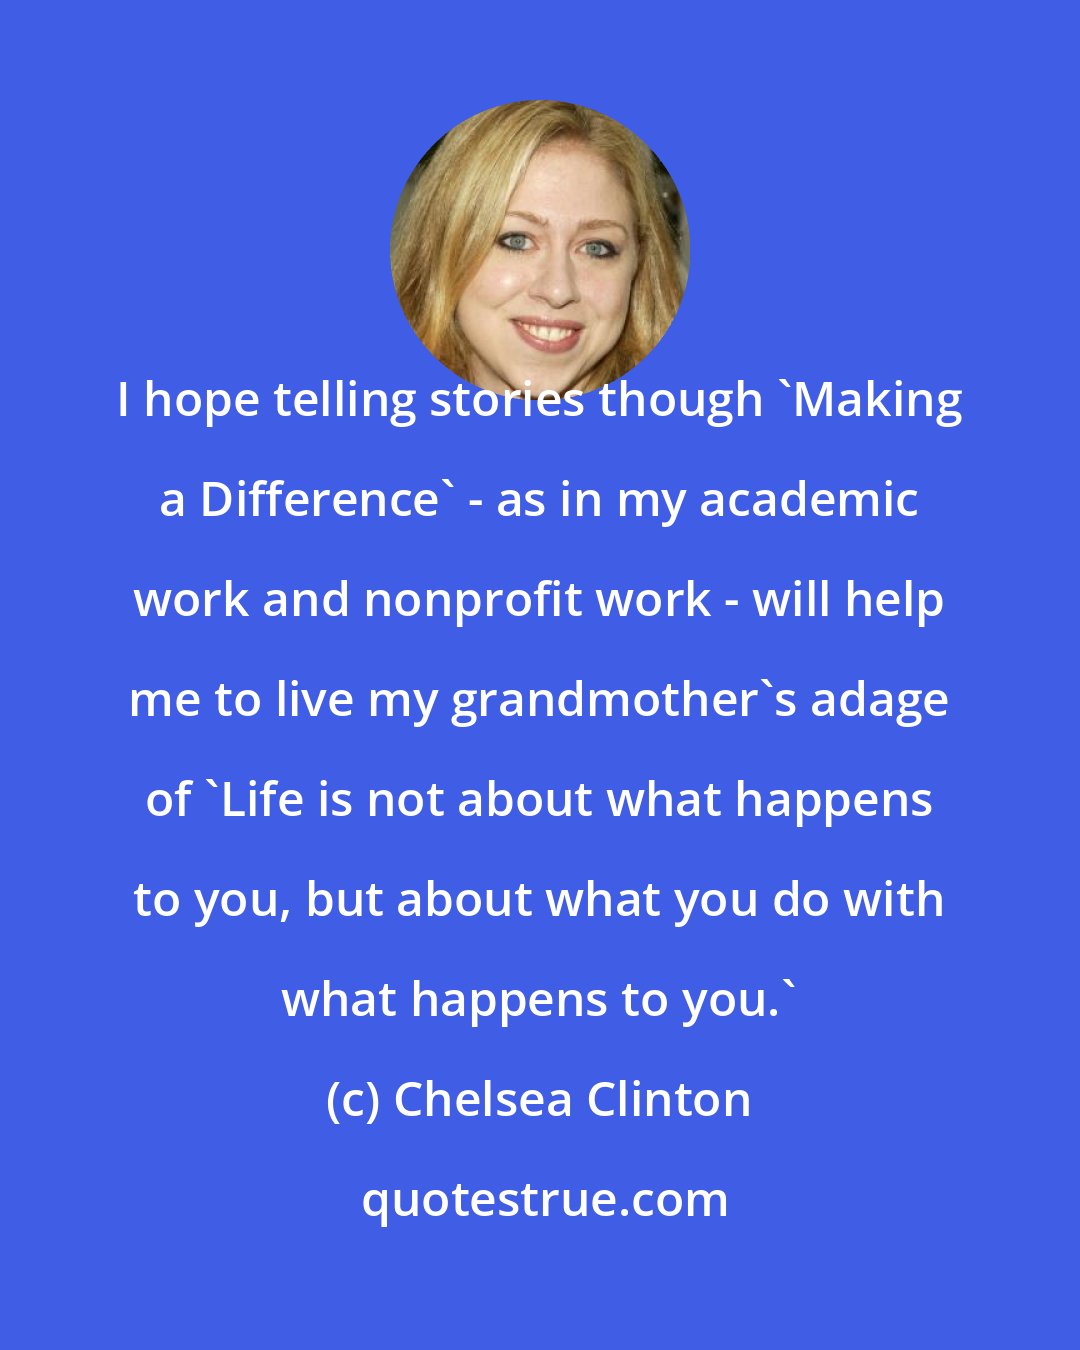 Chelsea Clinton: I hope telling stories though 'Making a Difference' - as in my academic work and nonprofit work - will help me to live my grandmother's adage of 'Life is not about what happens to you, but about what you do with what happens to you.'